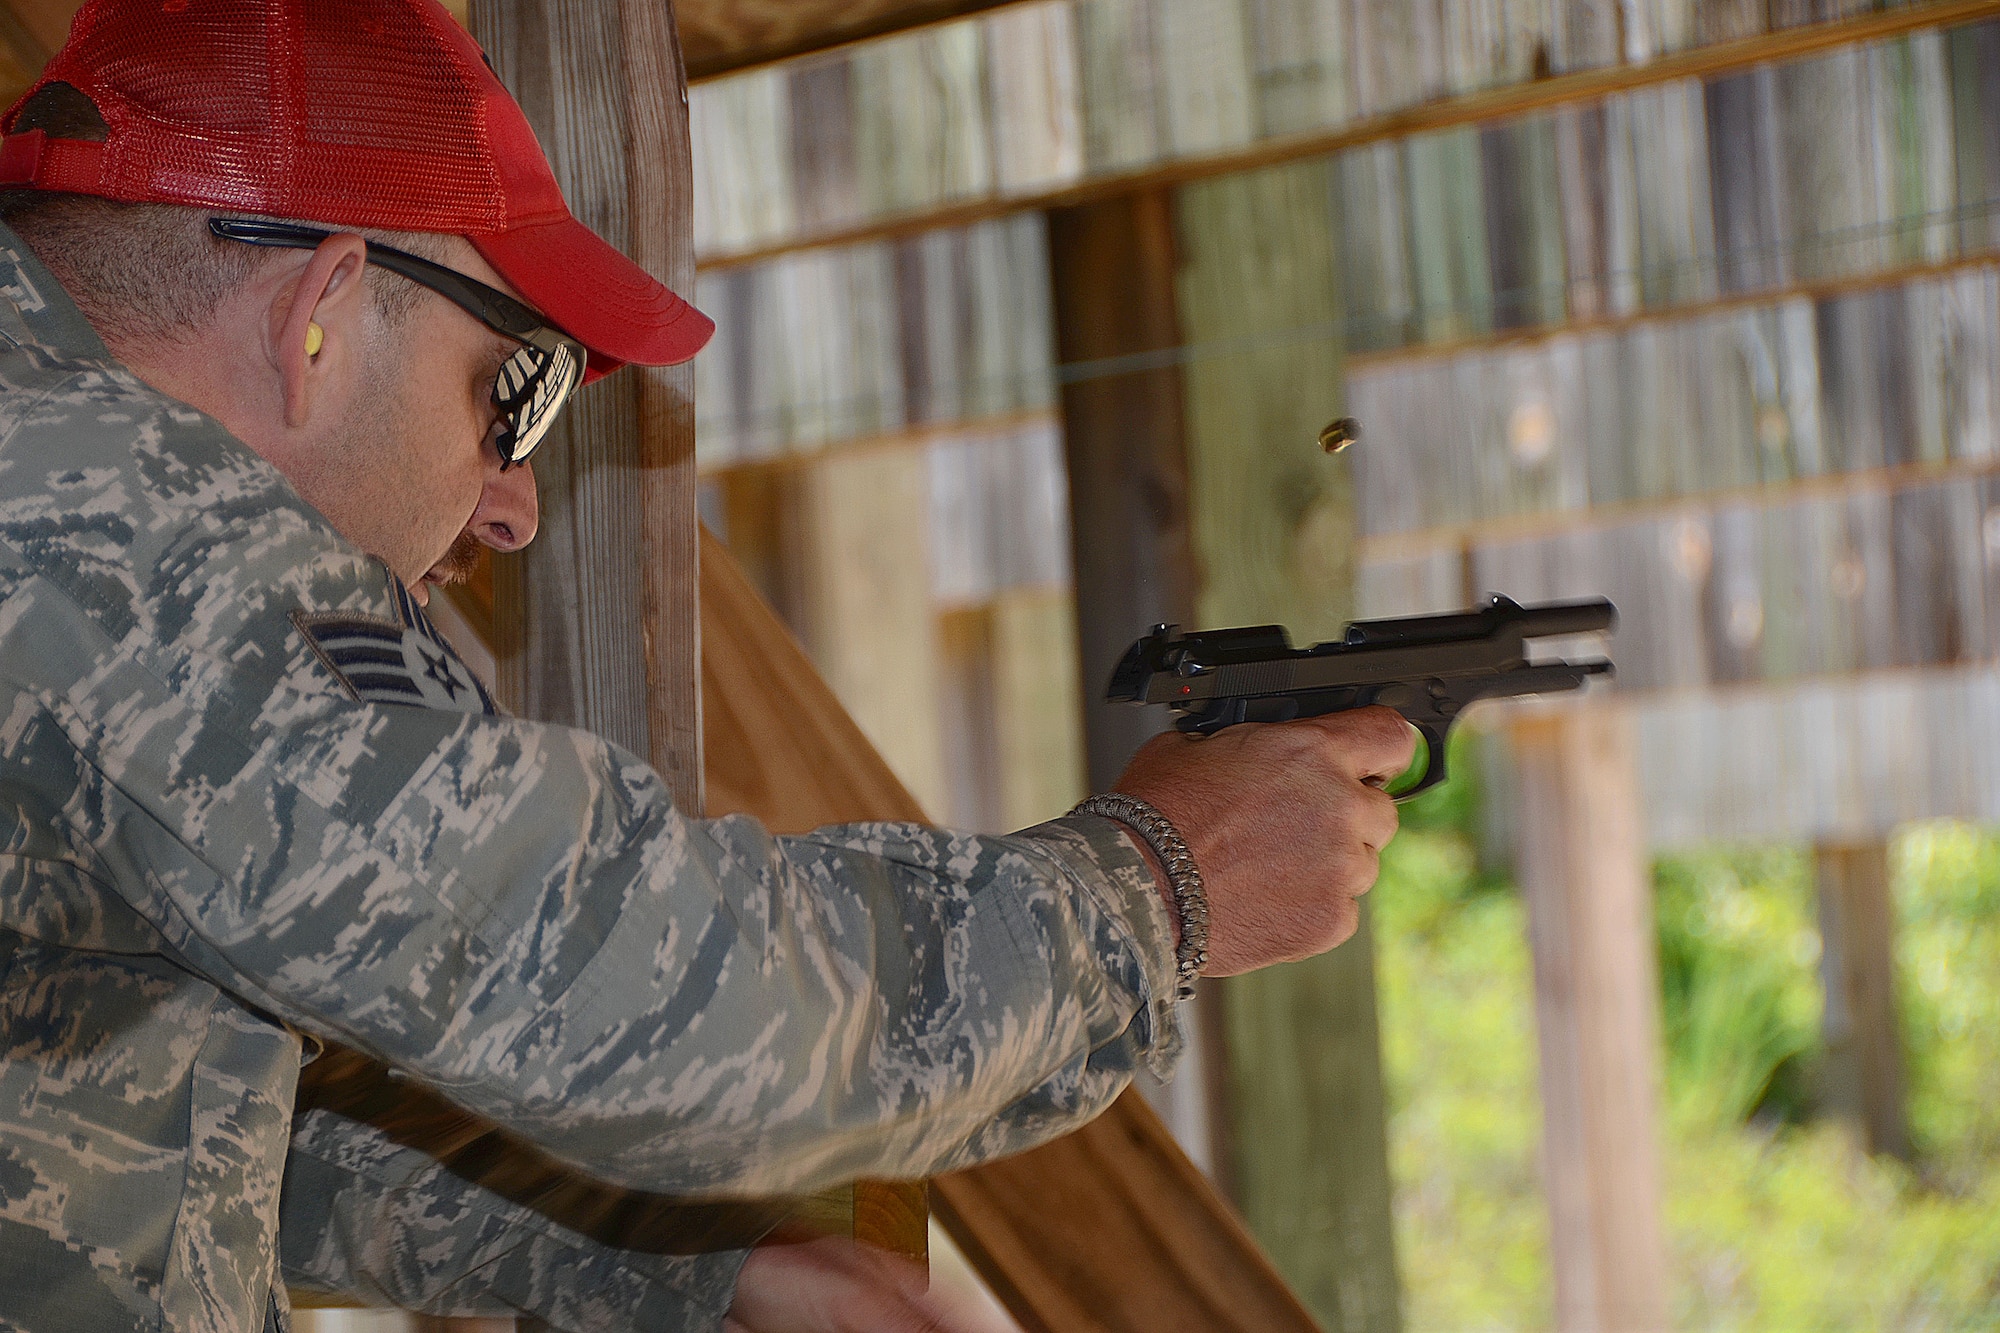 Staff Sgt. Kenvyn Lewis, assigned to the 169th Security Forces Squadron, instructs fellow South Carolina Air National Guard members during annual weapons qualification training at McEntire Joint National Guard Base, S.C May 20, 2014. Weapons qualification is an essential component of Airmen readiness and safety at home and abroad.  (U.S. Air National Guard photo by Airman 1st Class Ashleigh S. Pavelek/Released)